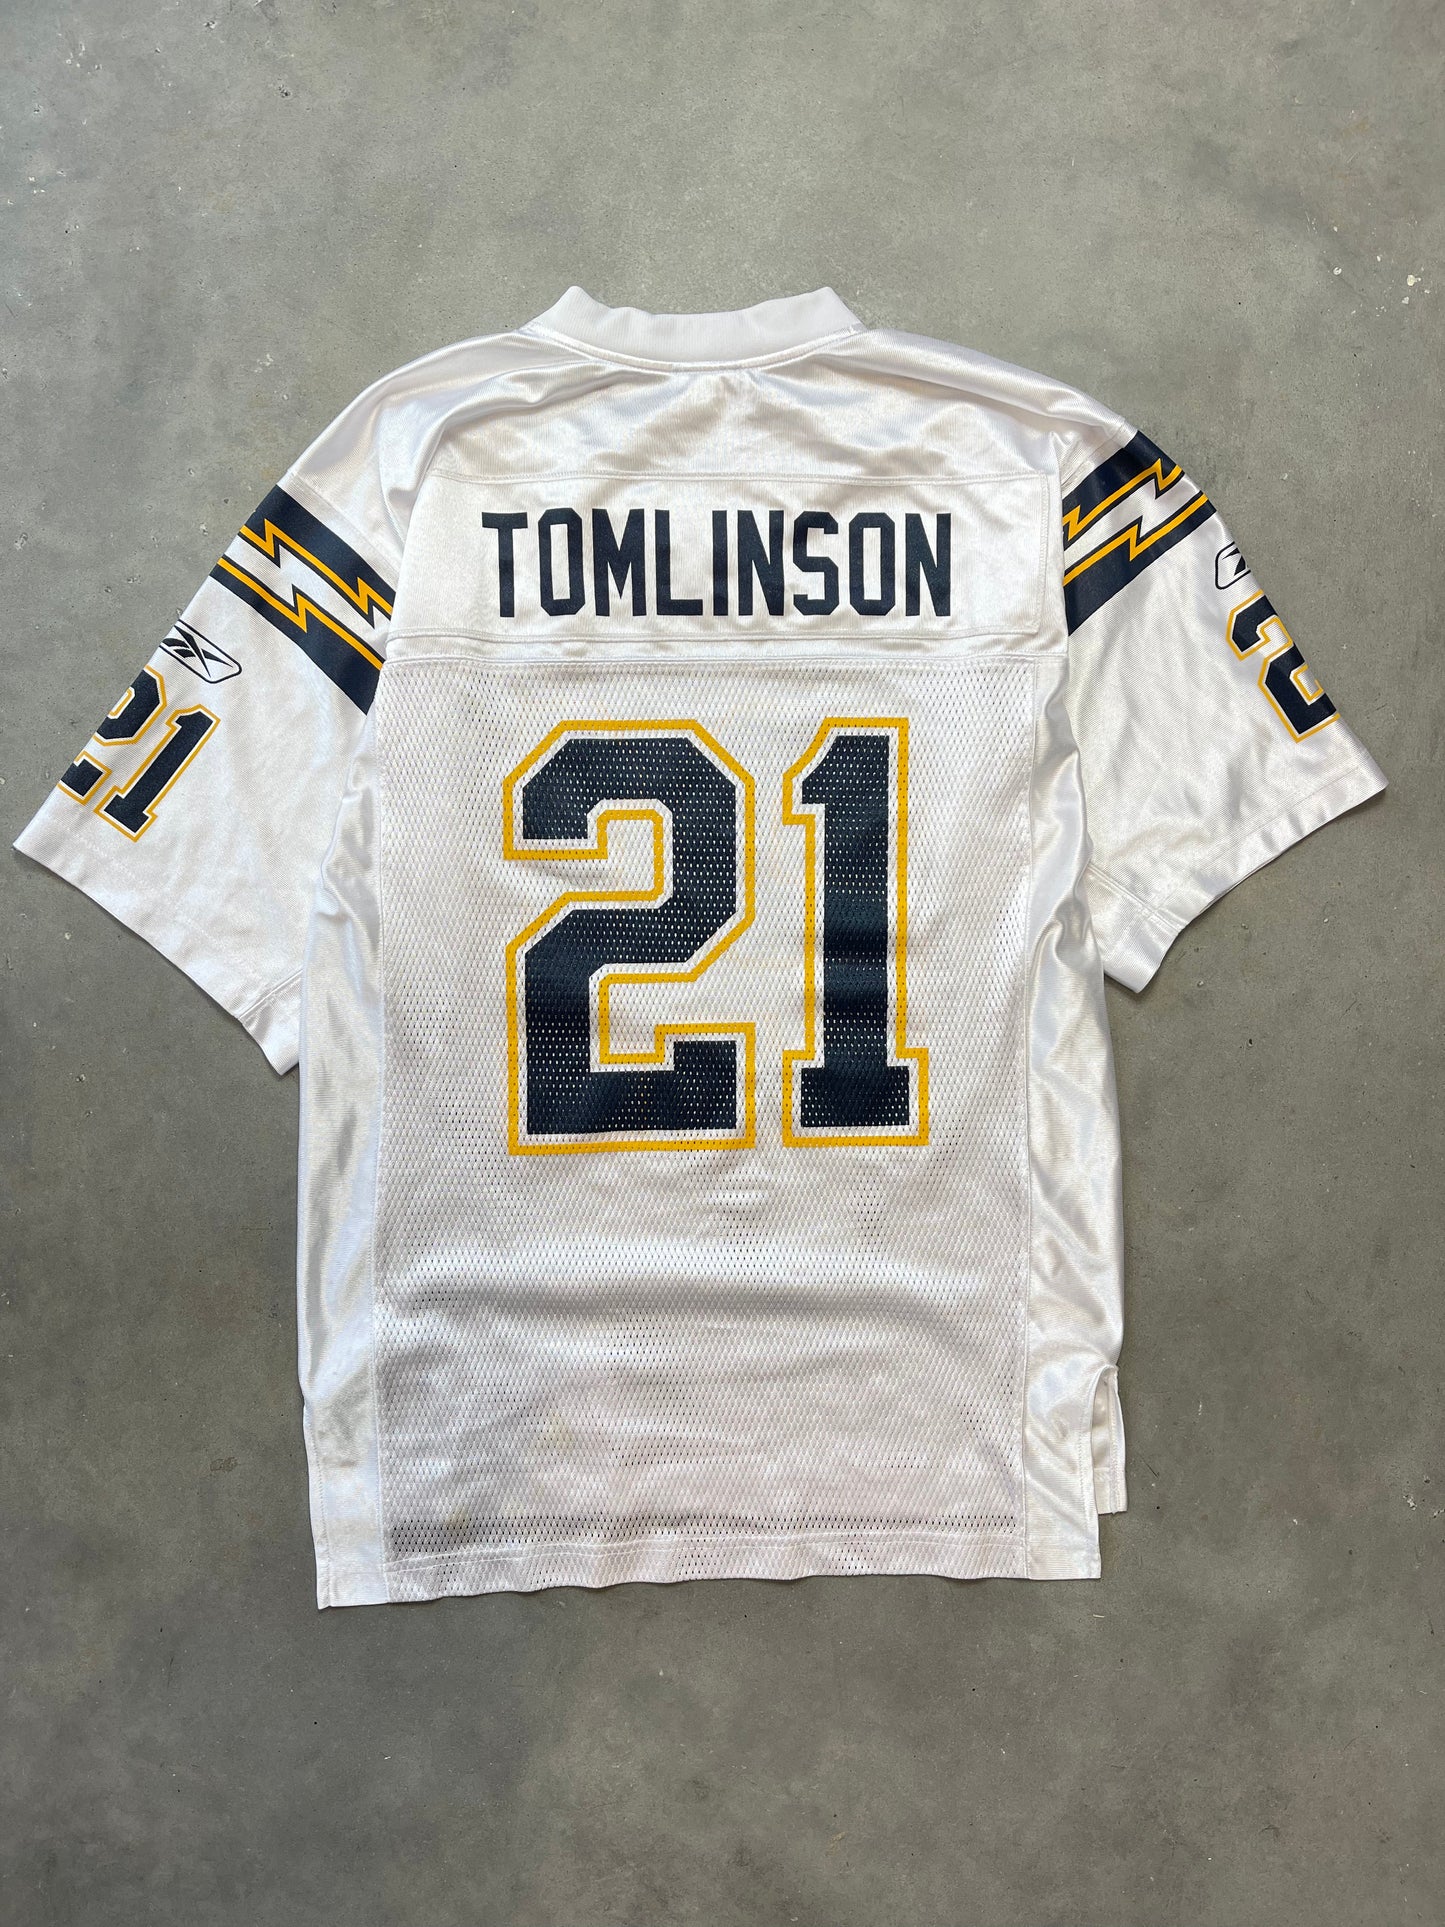 00's San Diego Chargers Ladainian Tomlinson Vintage White Reebok NFL Jersey (Small)